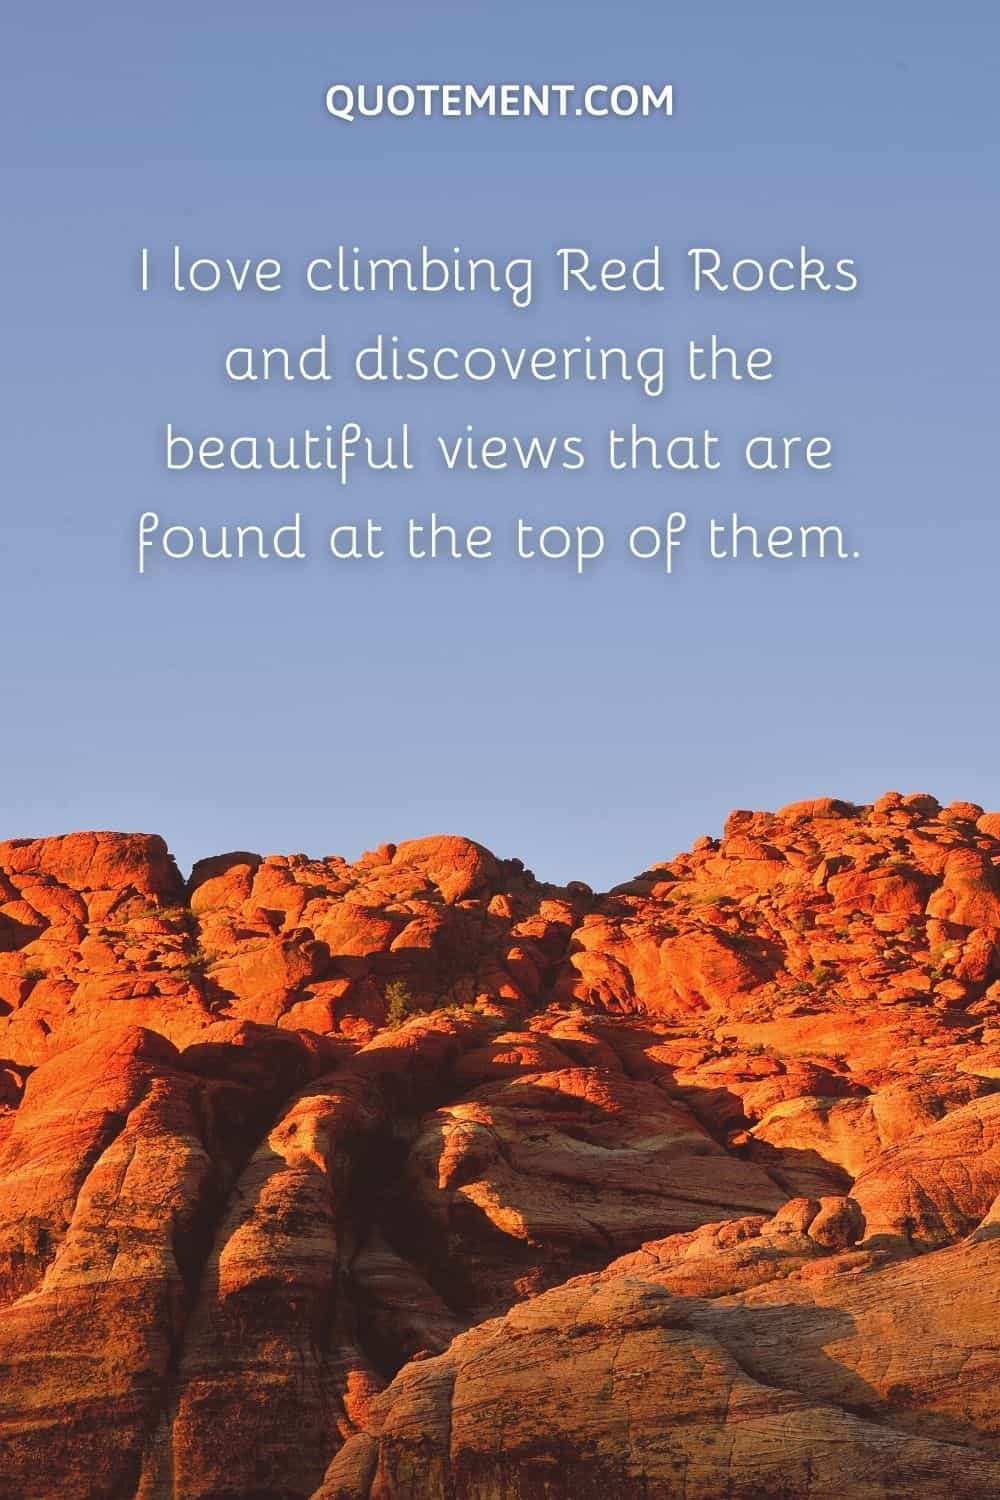 I love climbing Red Rocks and discovering the beautiful views that are found at the top of them.